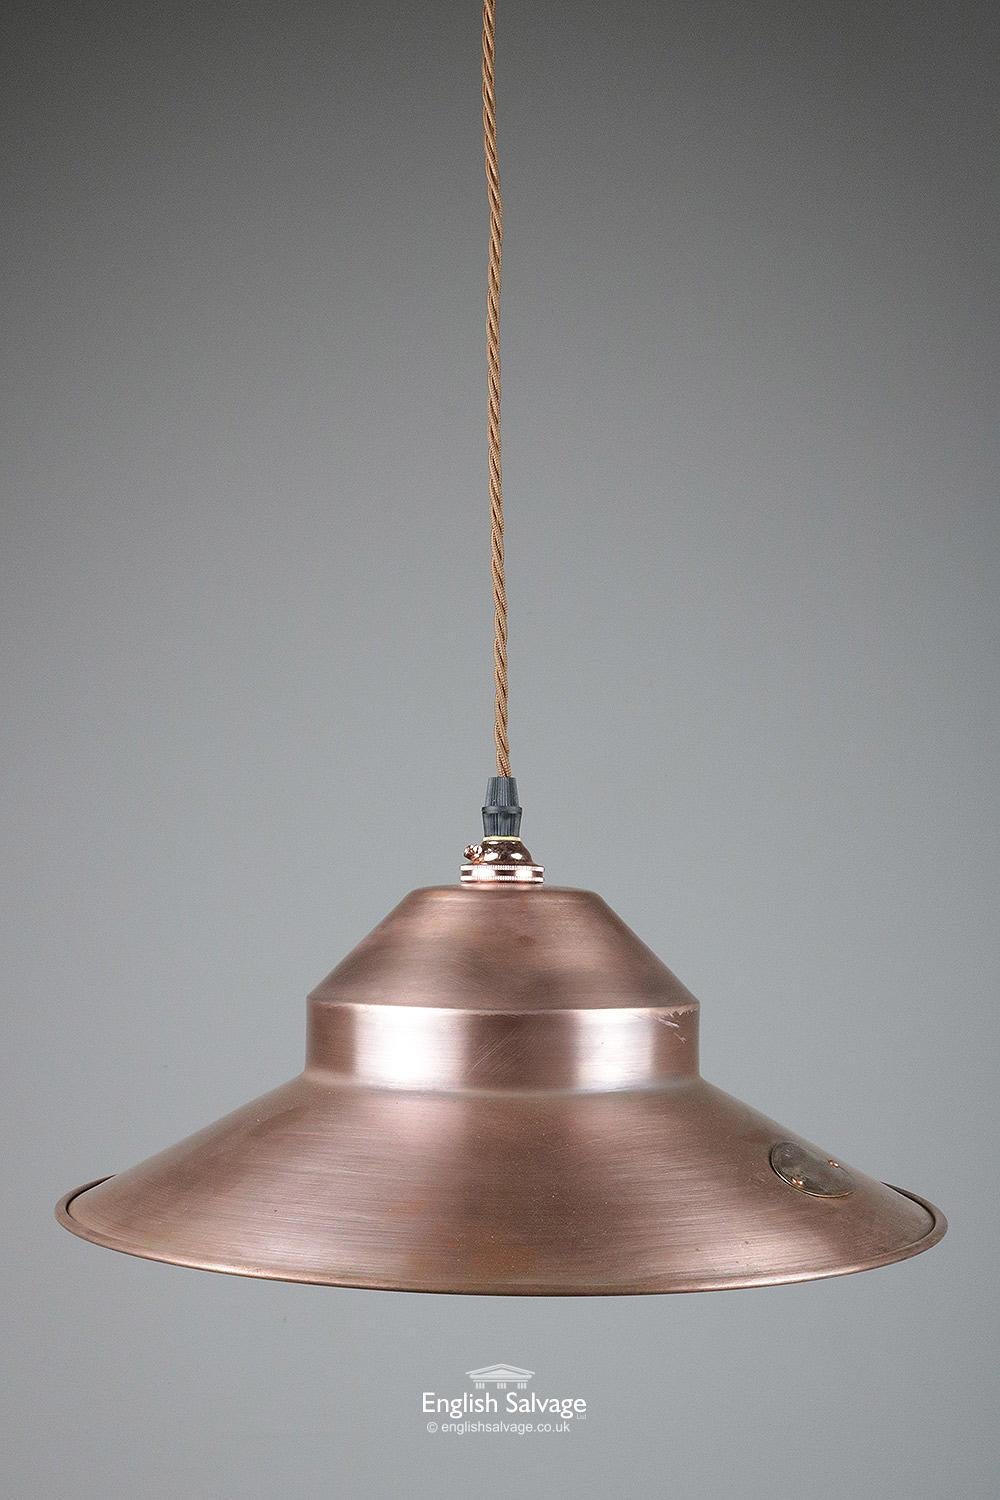 Attractive reclaimed steel-plated lampshades, these are available in three different finishes: copper-plated, bronze-plated or unfinished steel. Overall dimensions are shown below and the opening at the top is 2.7cm. We have 1 copper and 1 bronze